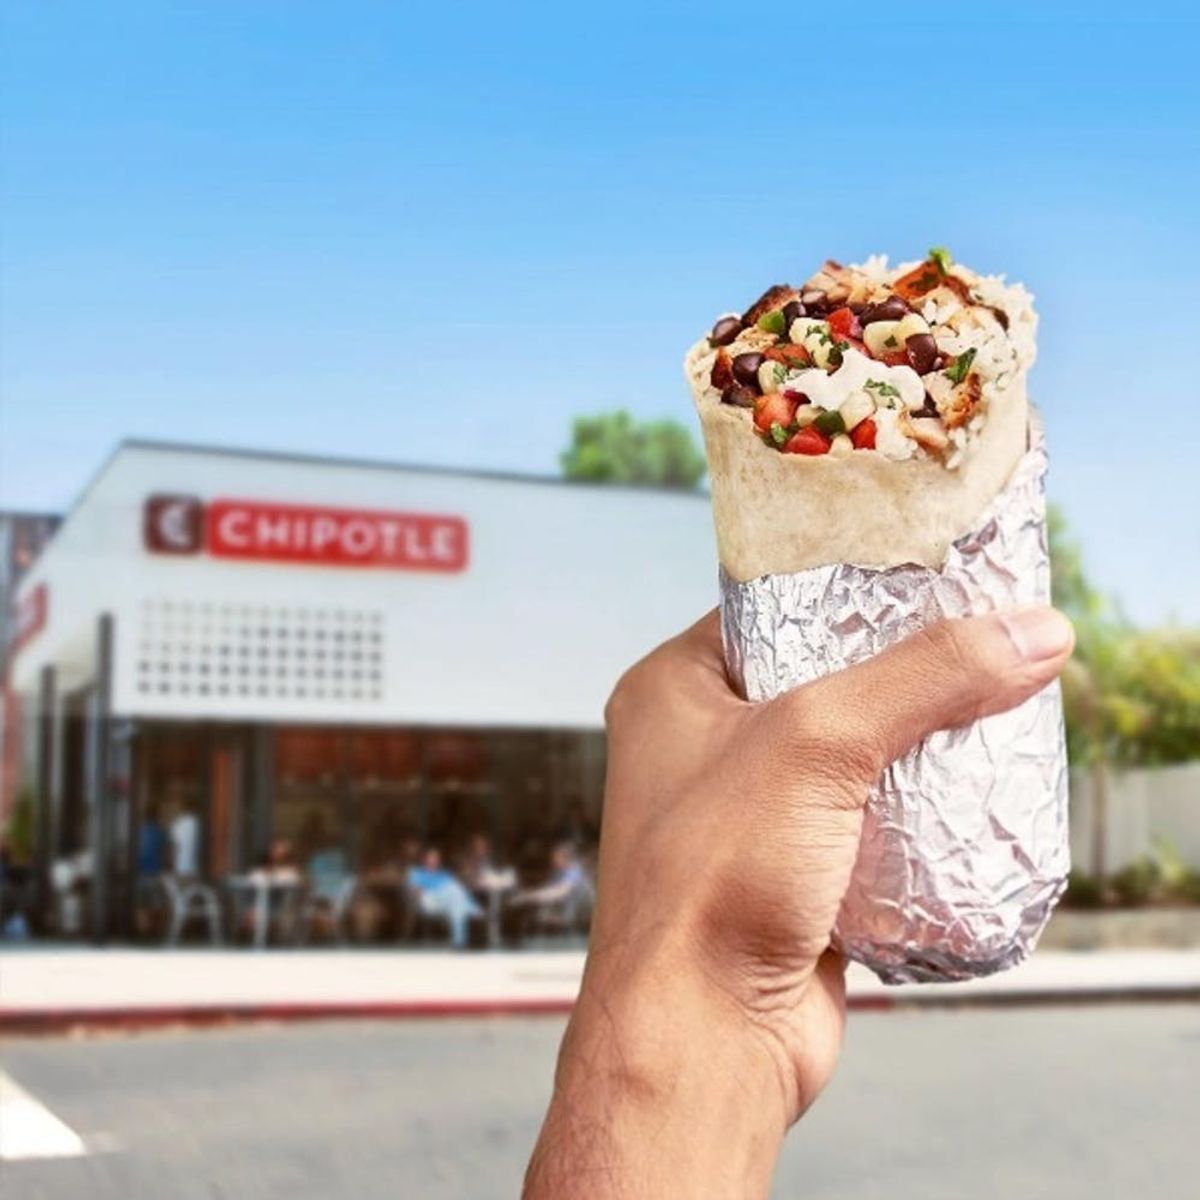 Here’s How to Get FREE Chipotle Burritos Right Now